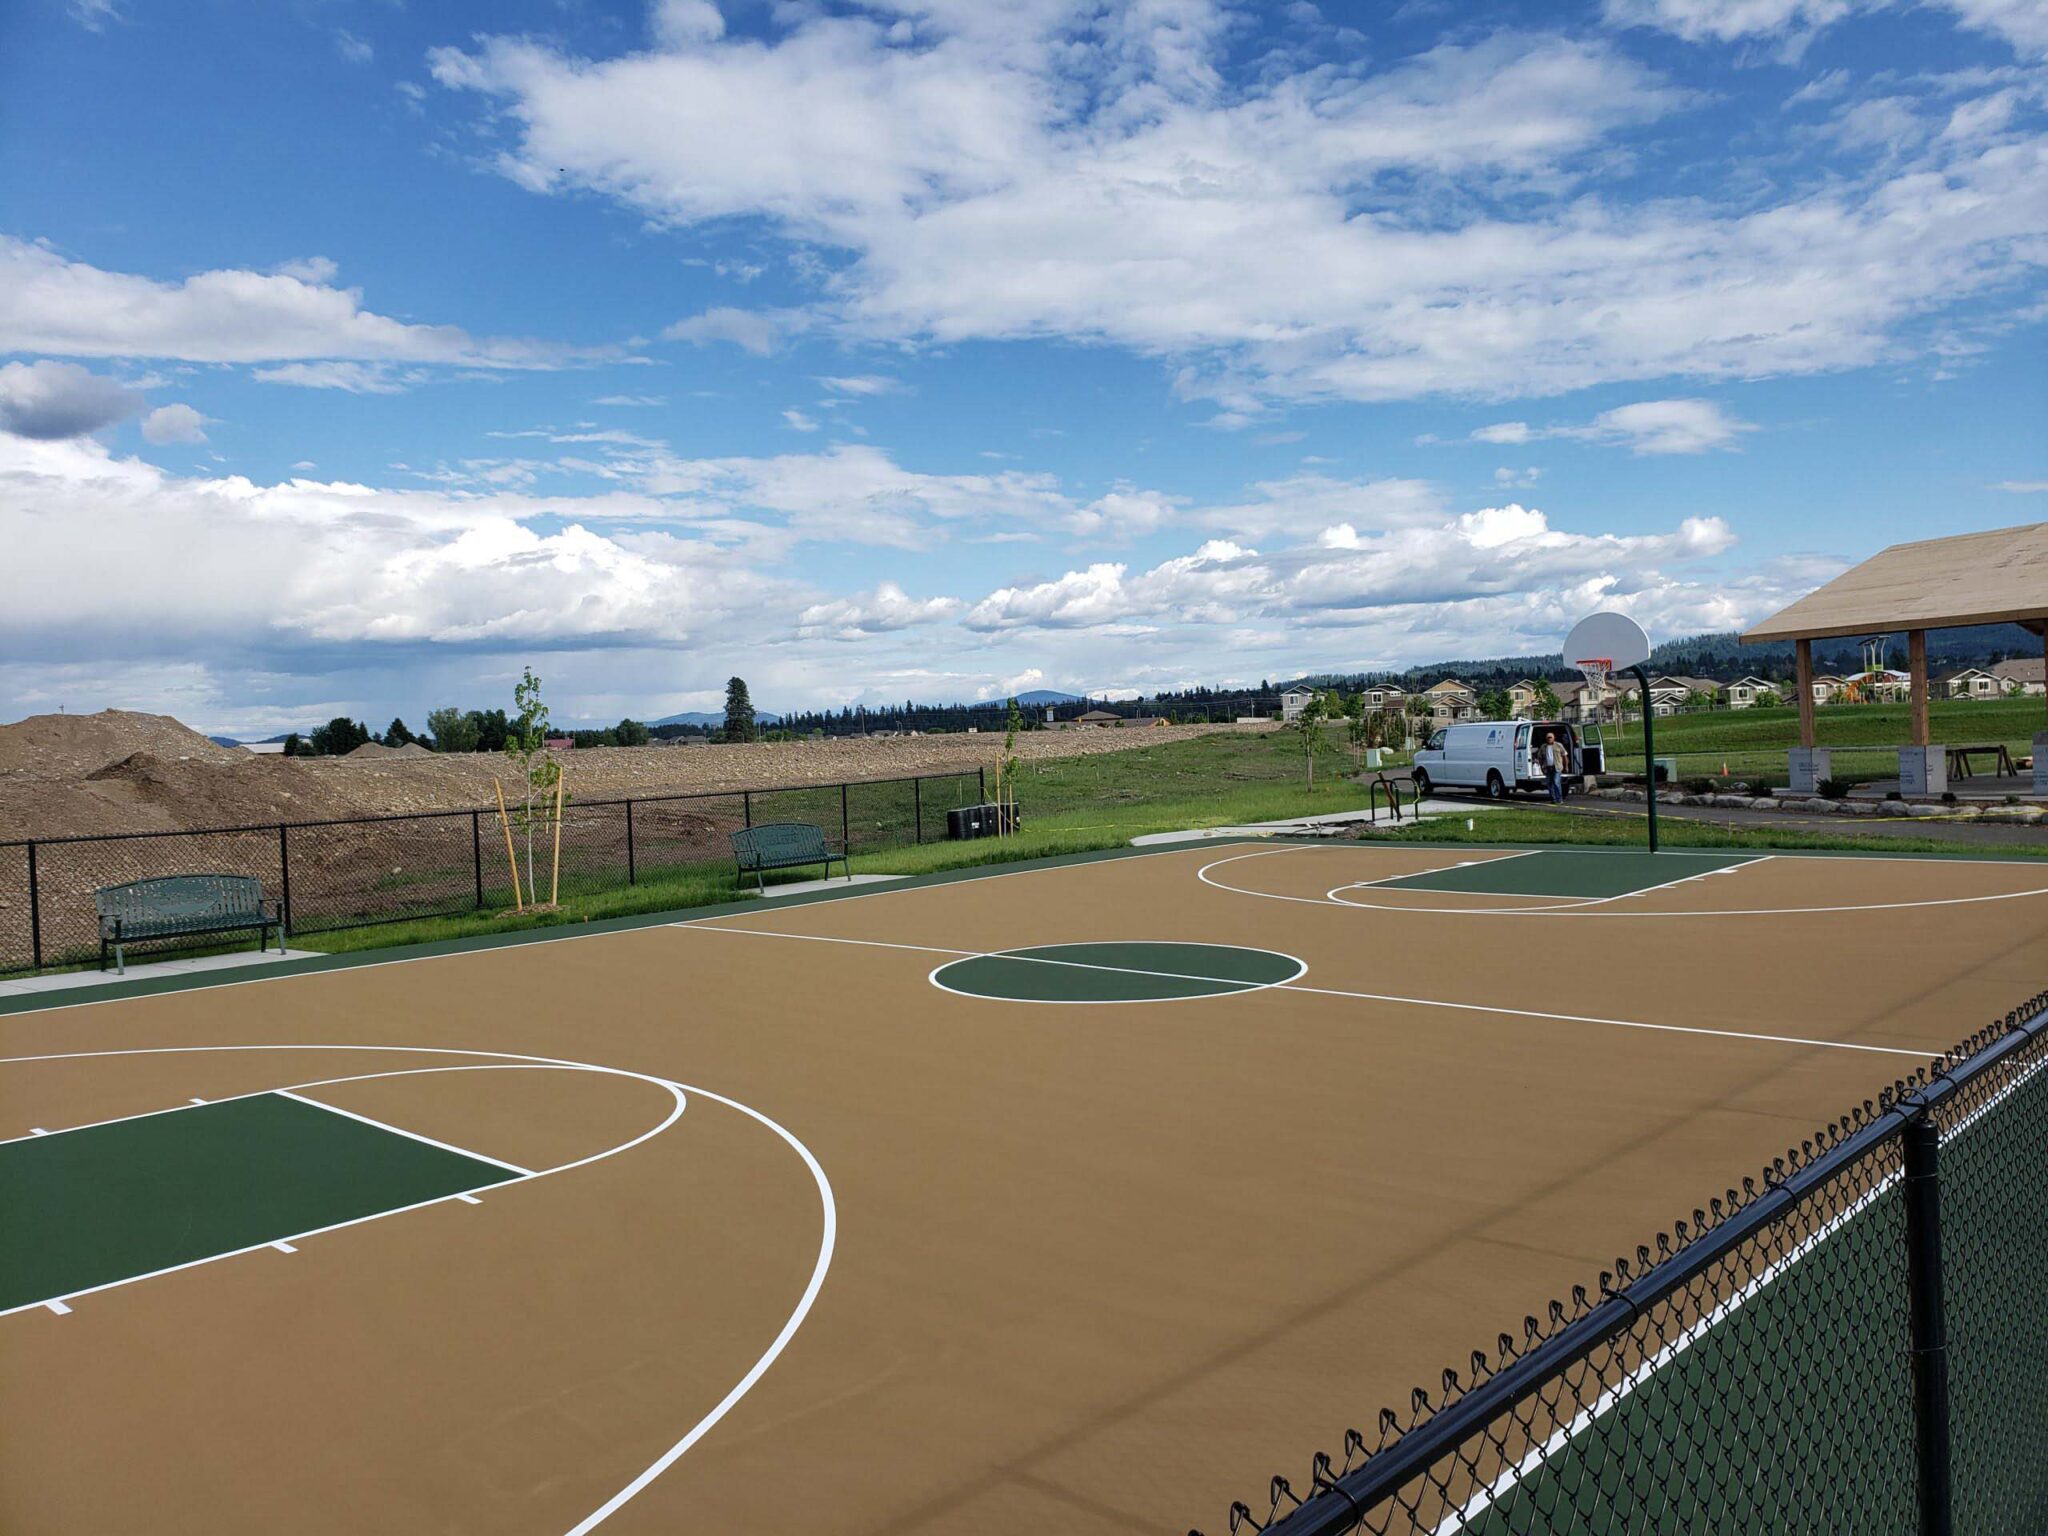 A new basketball court with a tan, green, and white color scheme.